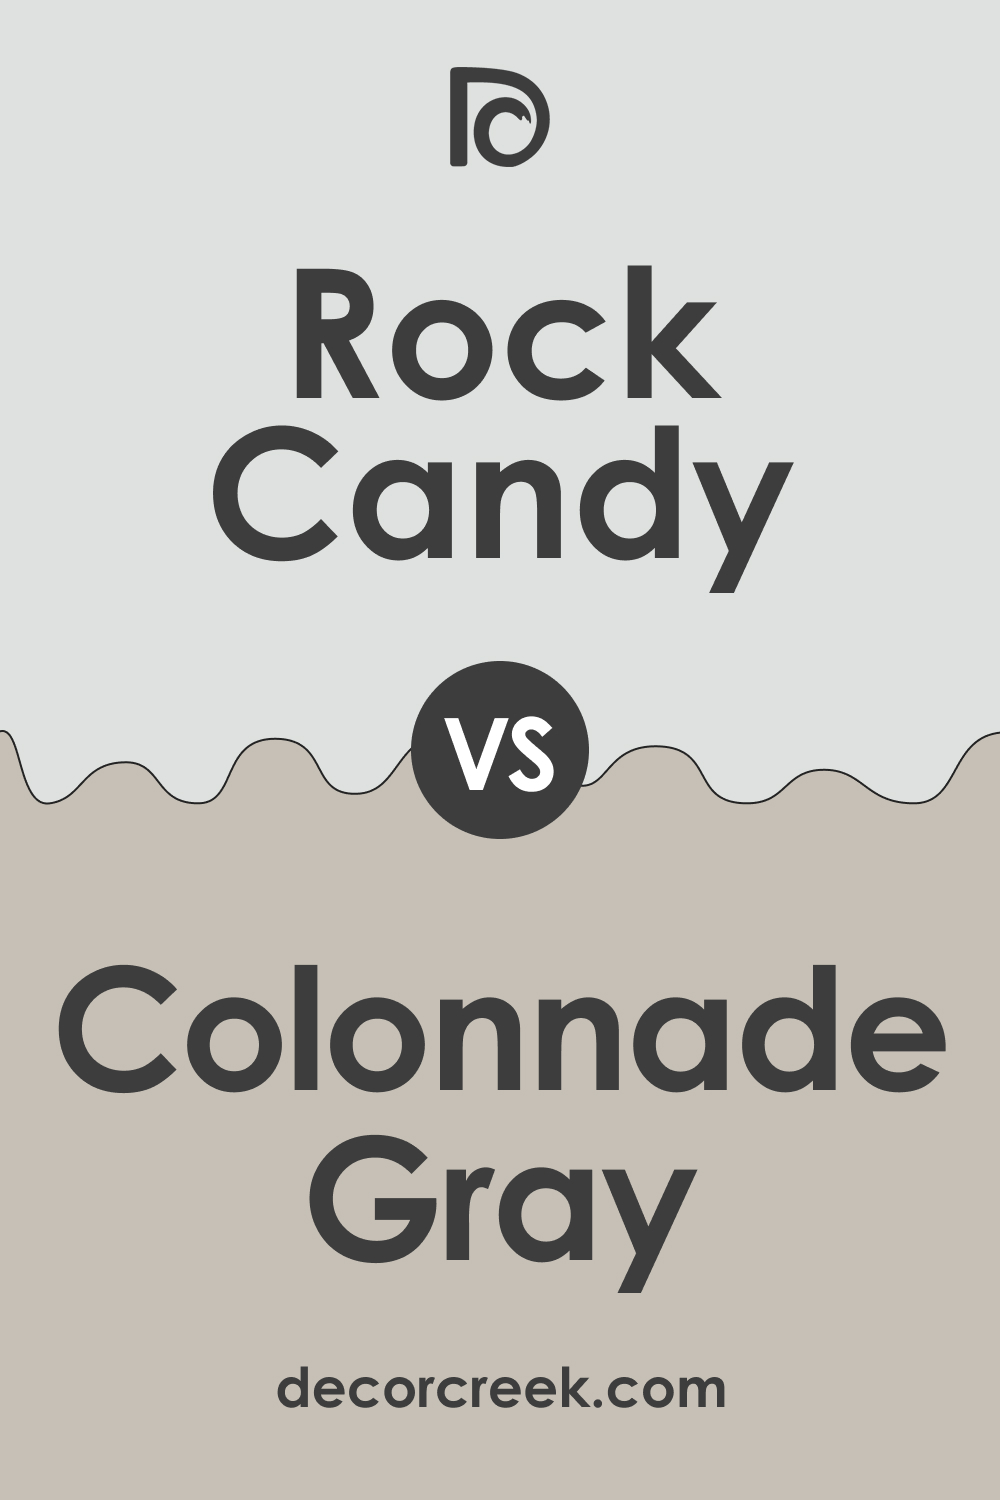 SW 6231 Rock Candy vs. SW 7641 Colonnade Gray